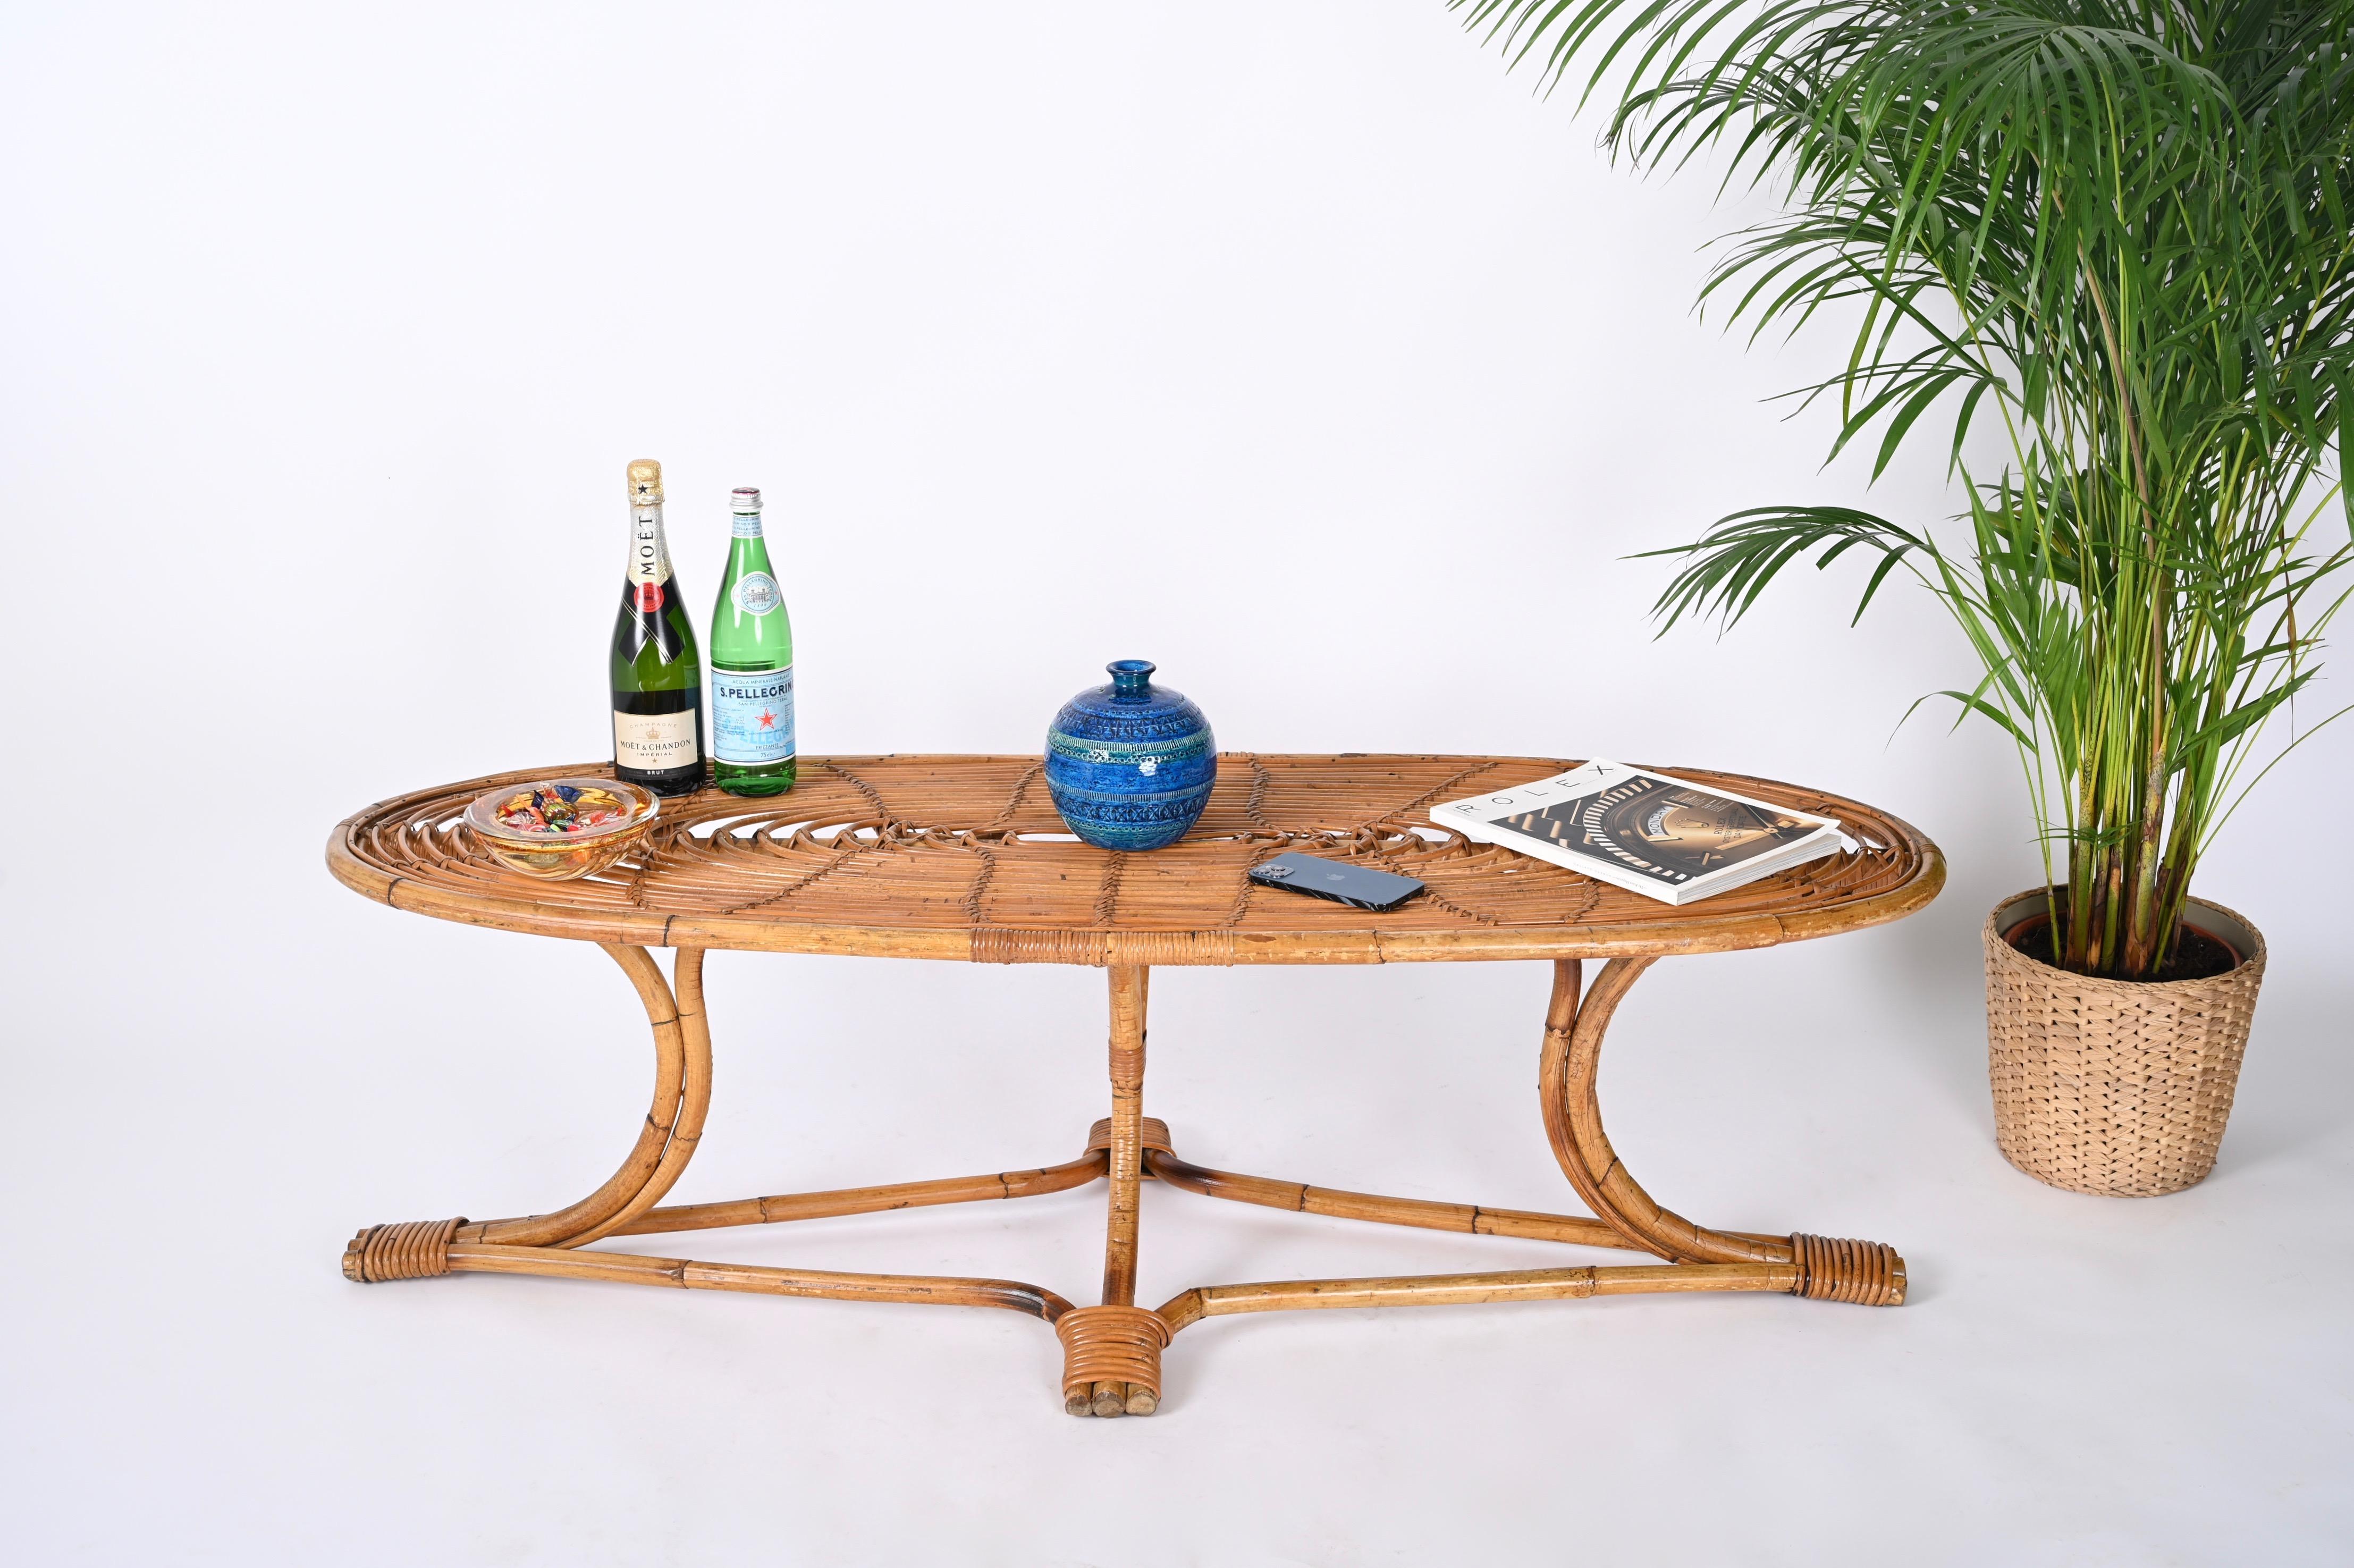 Marvellous large coffee table fully made in curved bamboo, rattan and wicker. This fantastic piece was realized in Italy during the 1970s. 

The table features a stunning base with four legs in curved bamboo kept together by thick rattan wicker. The